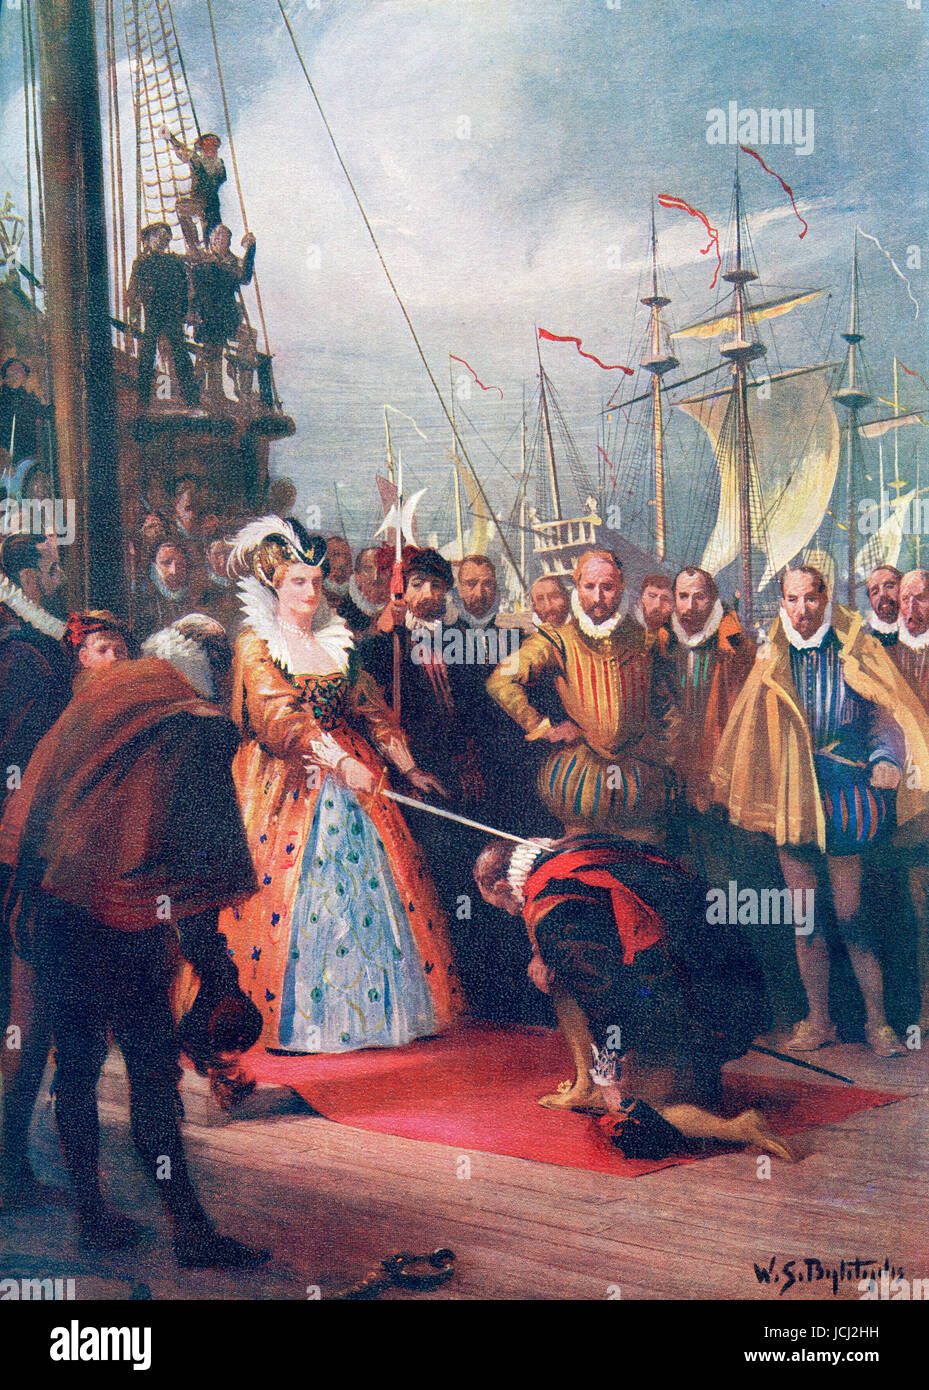 Queen Elizabeth I knighting Sir Francis Drake on board The Golden Hind at Deptford 4th April, 1581. Elizabeth I,aka The Virgin Queen, Gloriana or Good Queen Bess, 1533 –  1603.  Queen of England and Ireland. Sir Francis Drake, vice admiral, c. 1540 –  1596.  English sea captain, privateer, navigator, slaver, and politician.   After the painting by W.S. Bagdatopoulus(1888-1965).  From Hutchinson's History of the Nations, published 1915. Stock Photo